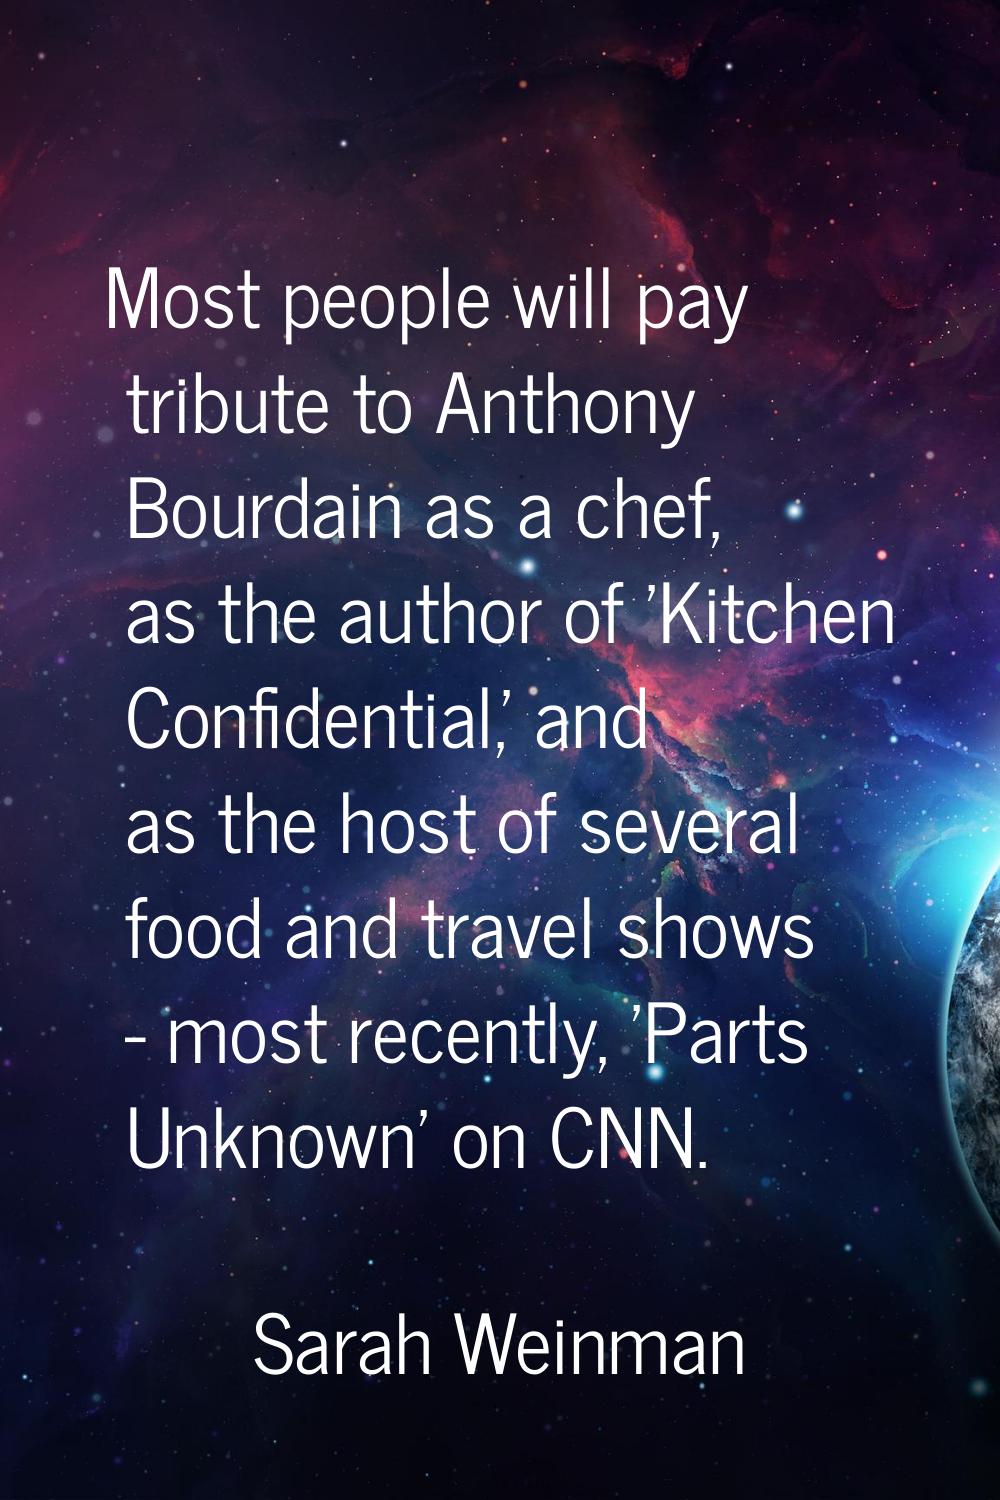 Most people will pay tribute to Anthony Bourdain as a chef, as the author of 'Kitchen Confidential,